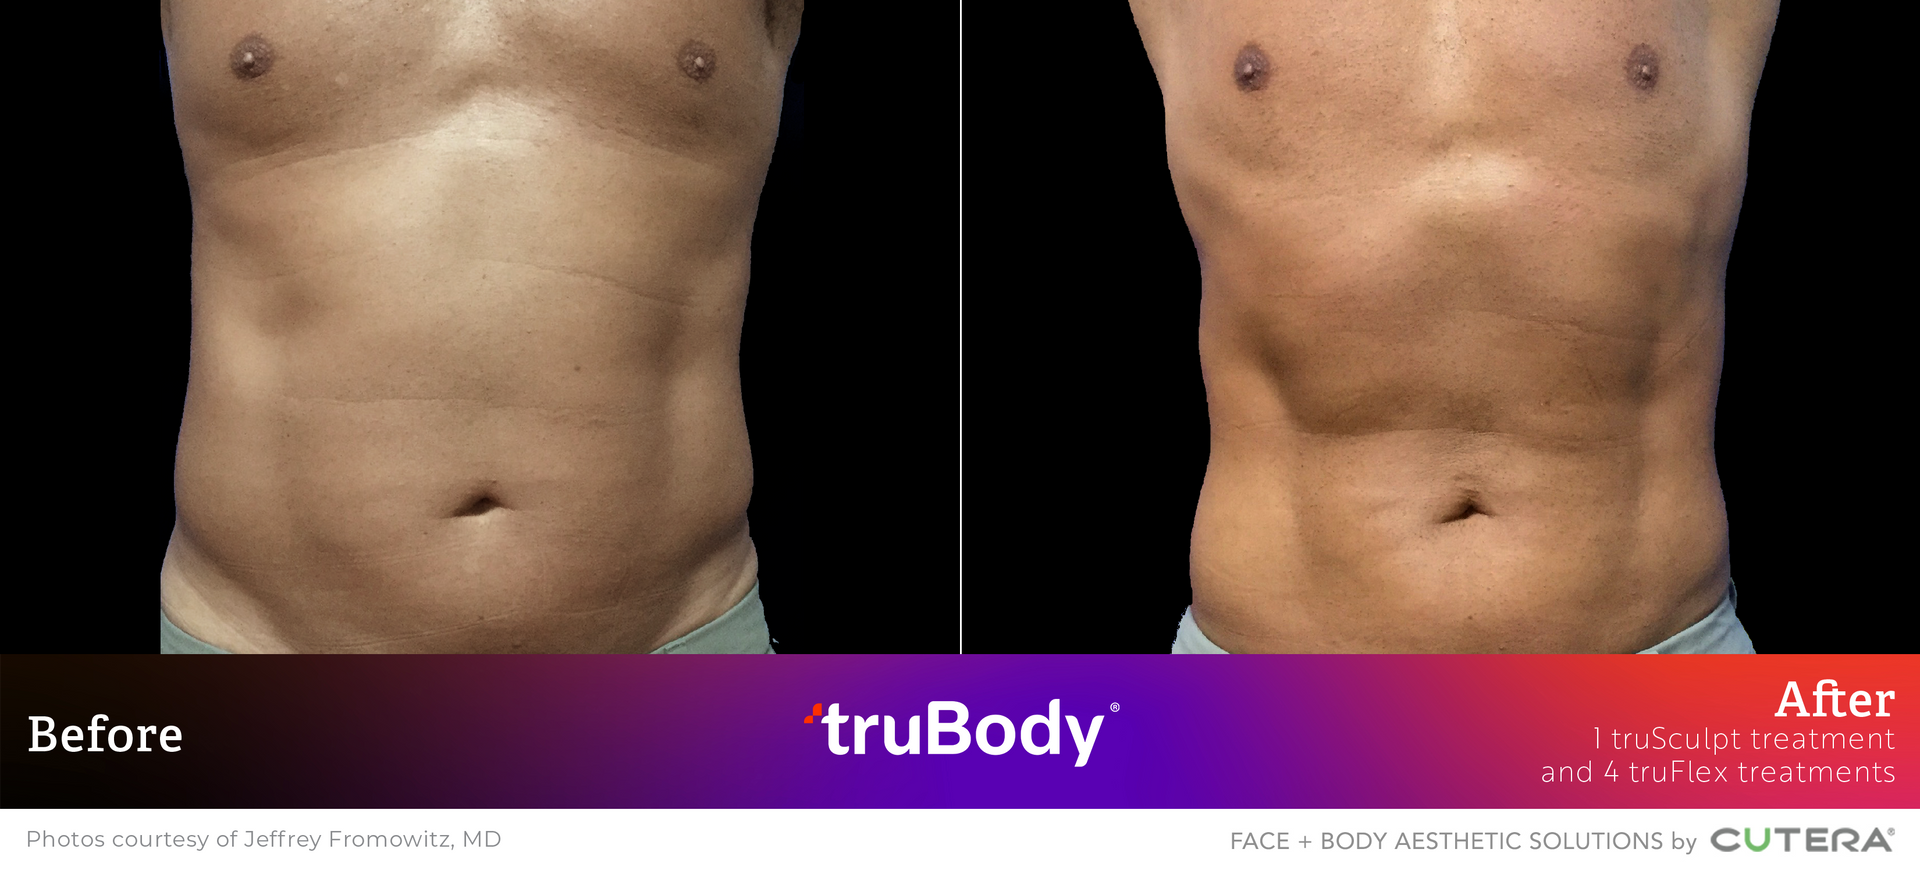 A before and after photo of a man 's torso.